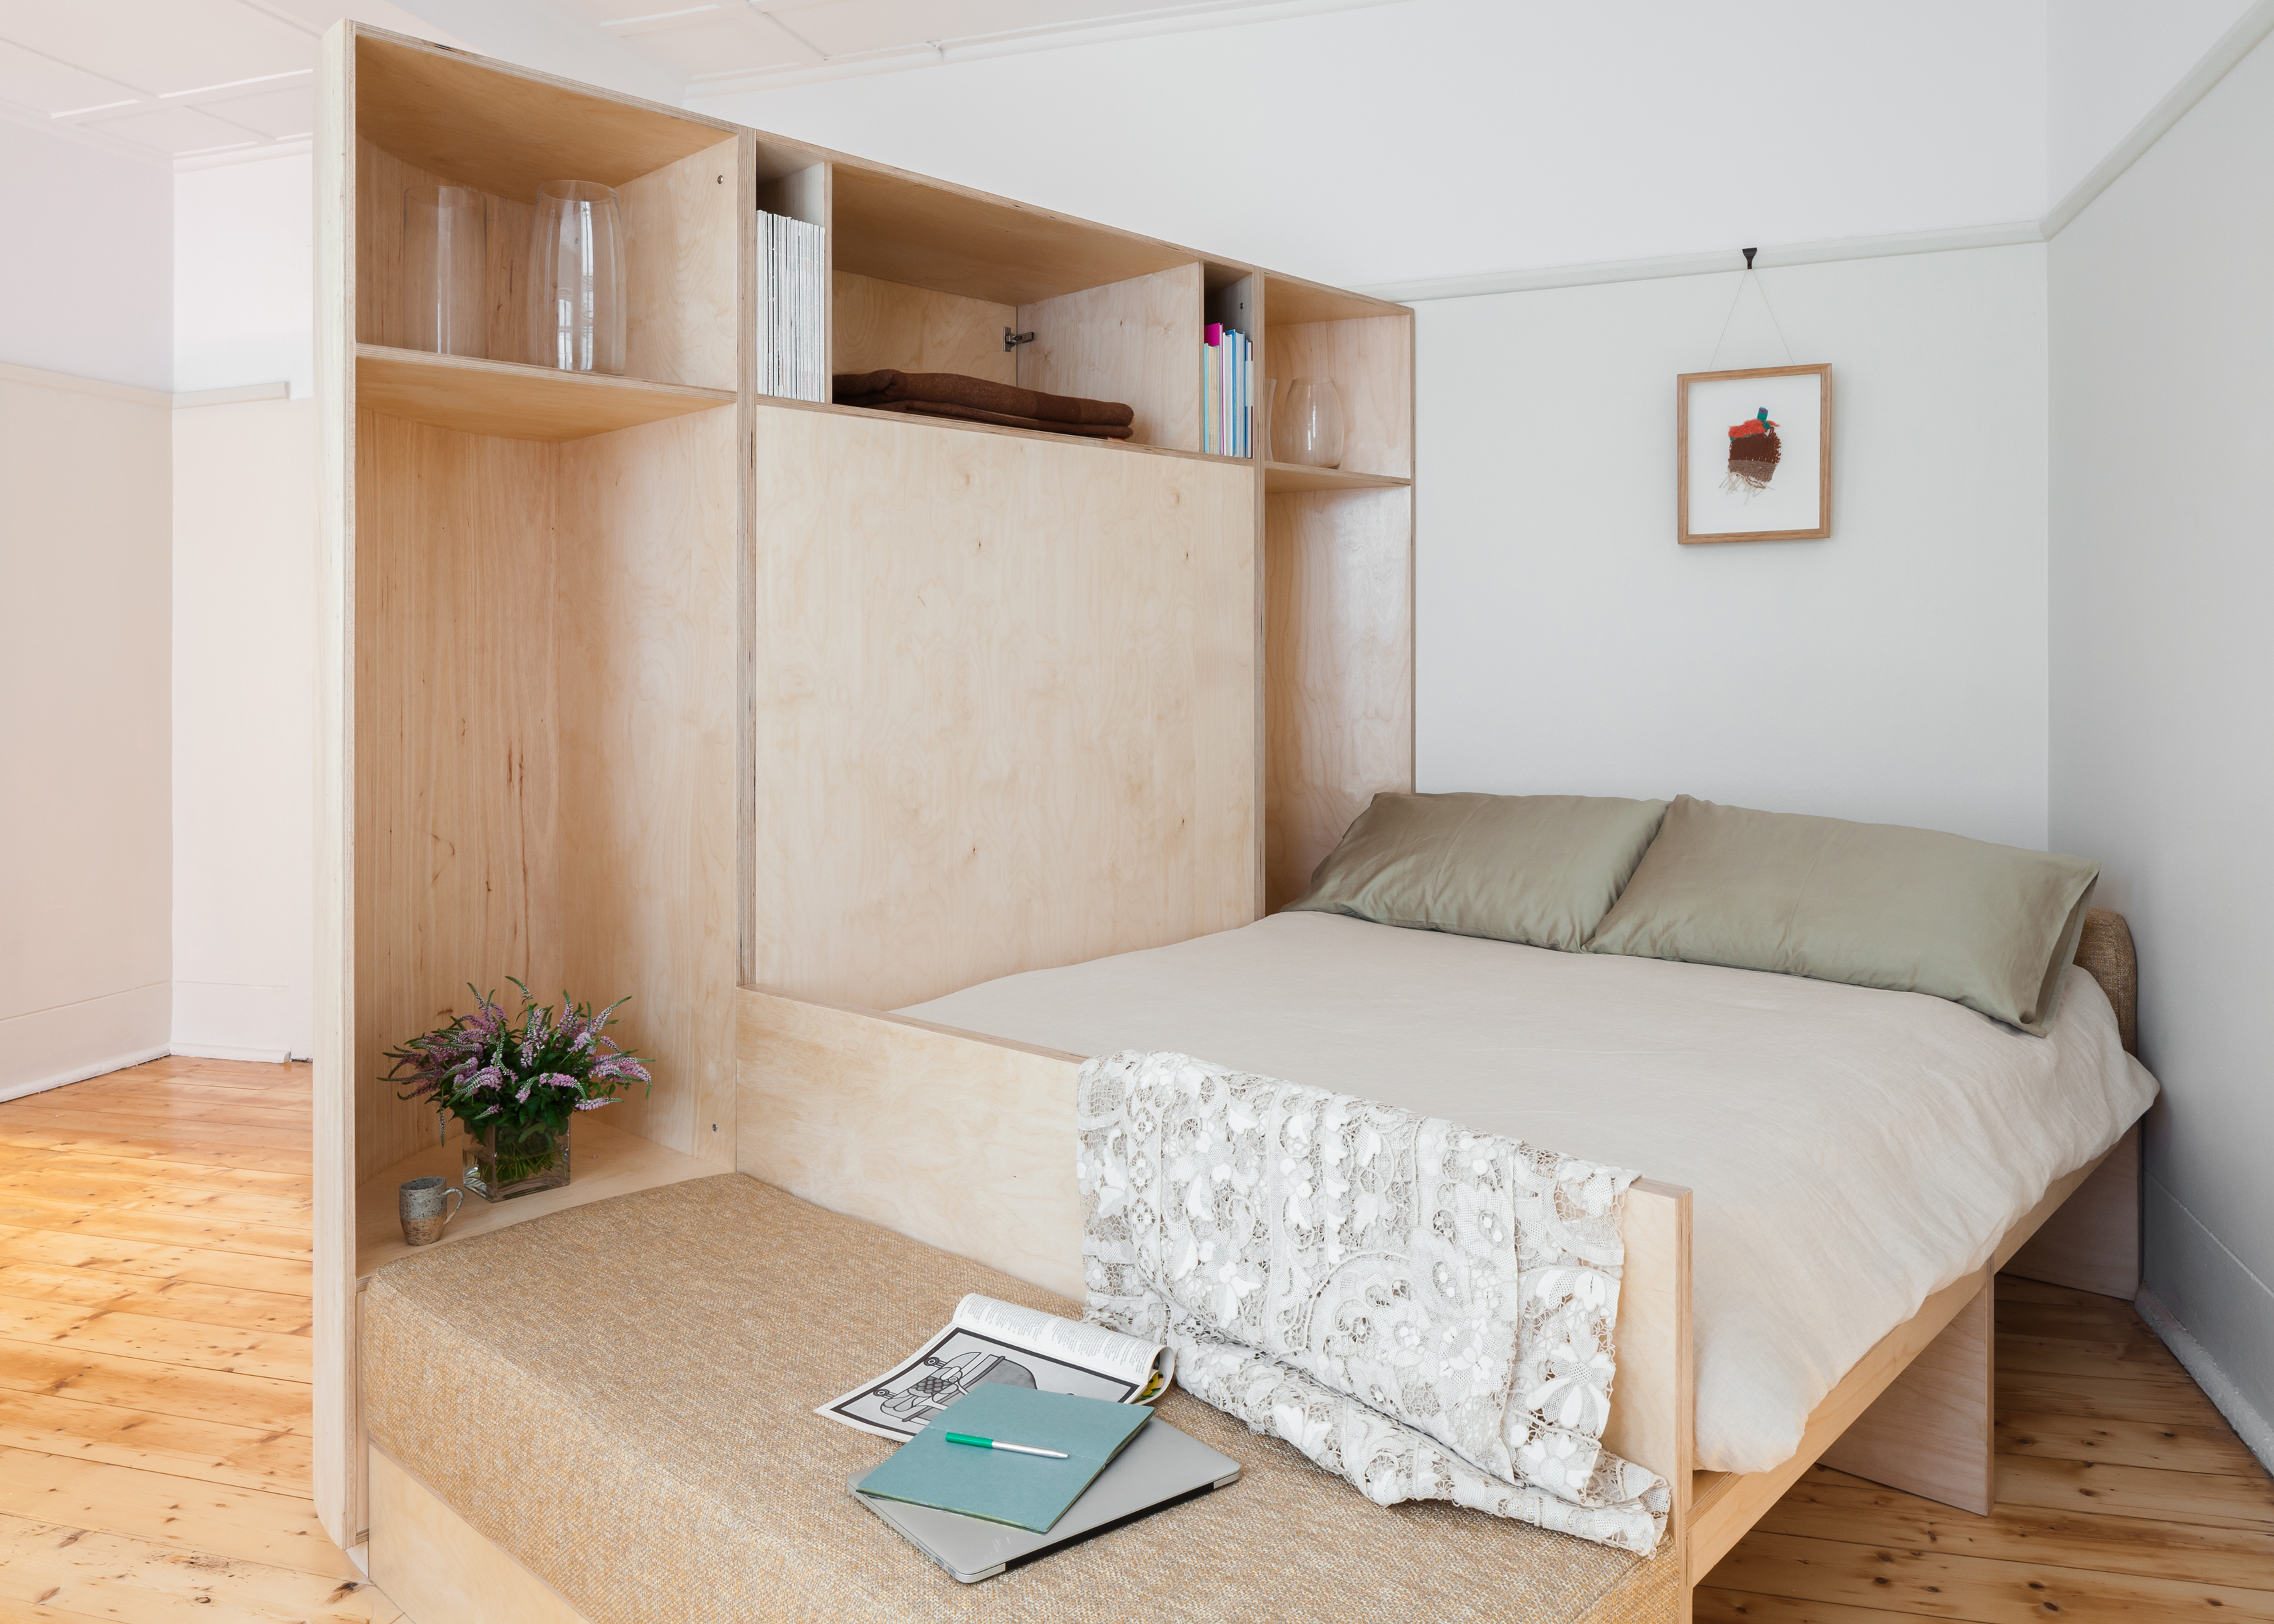 Eight Tiny Apartments That Make The Most Of Every Square Inch